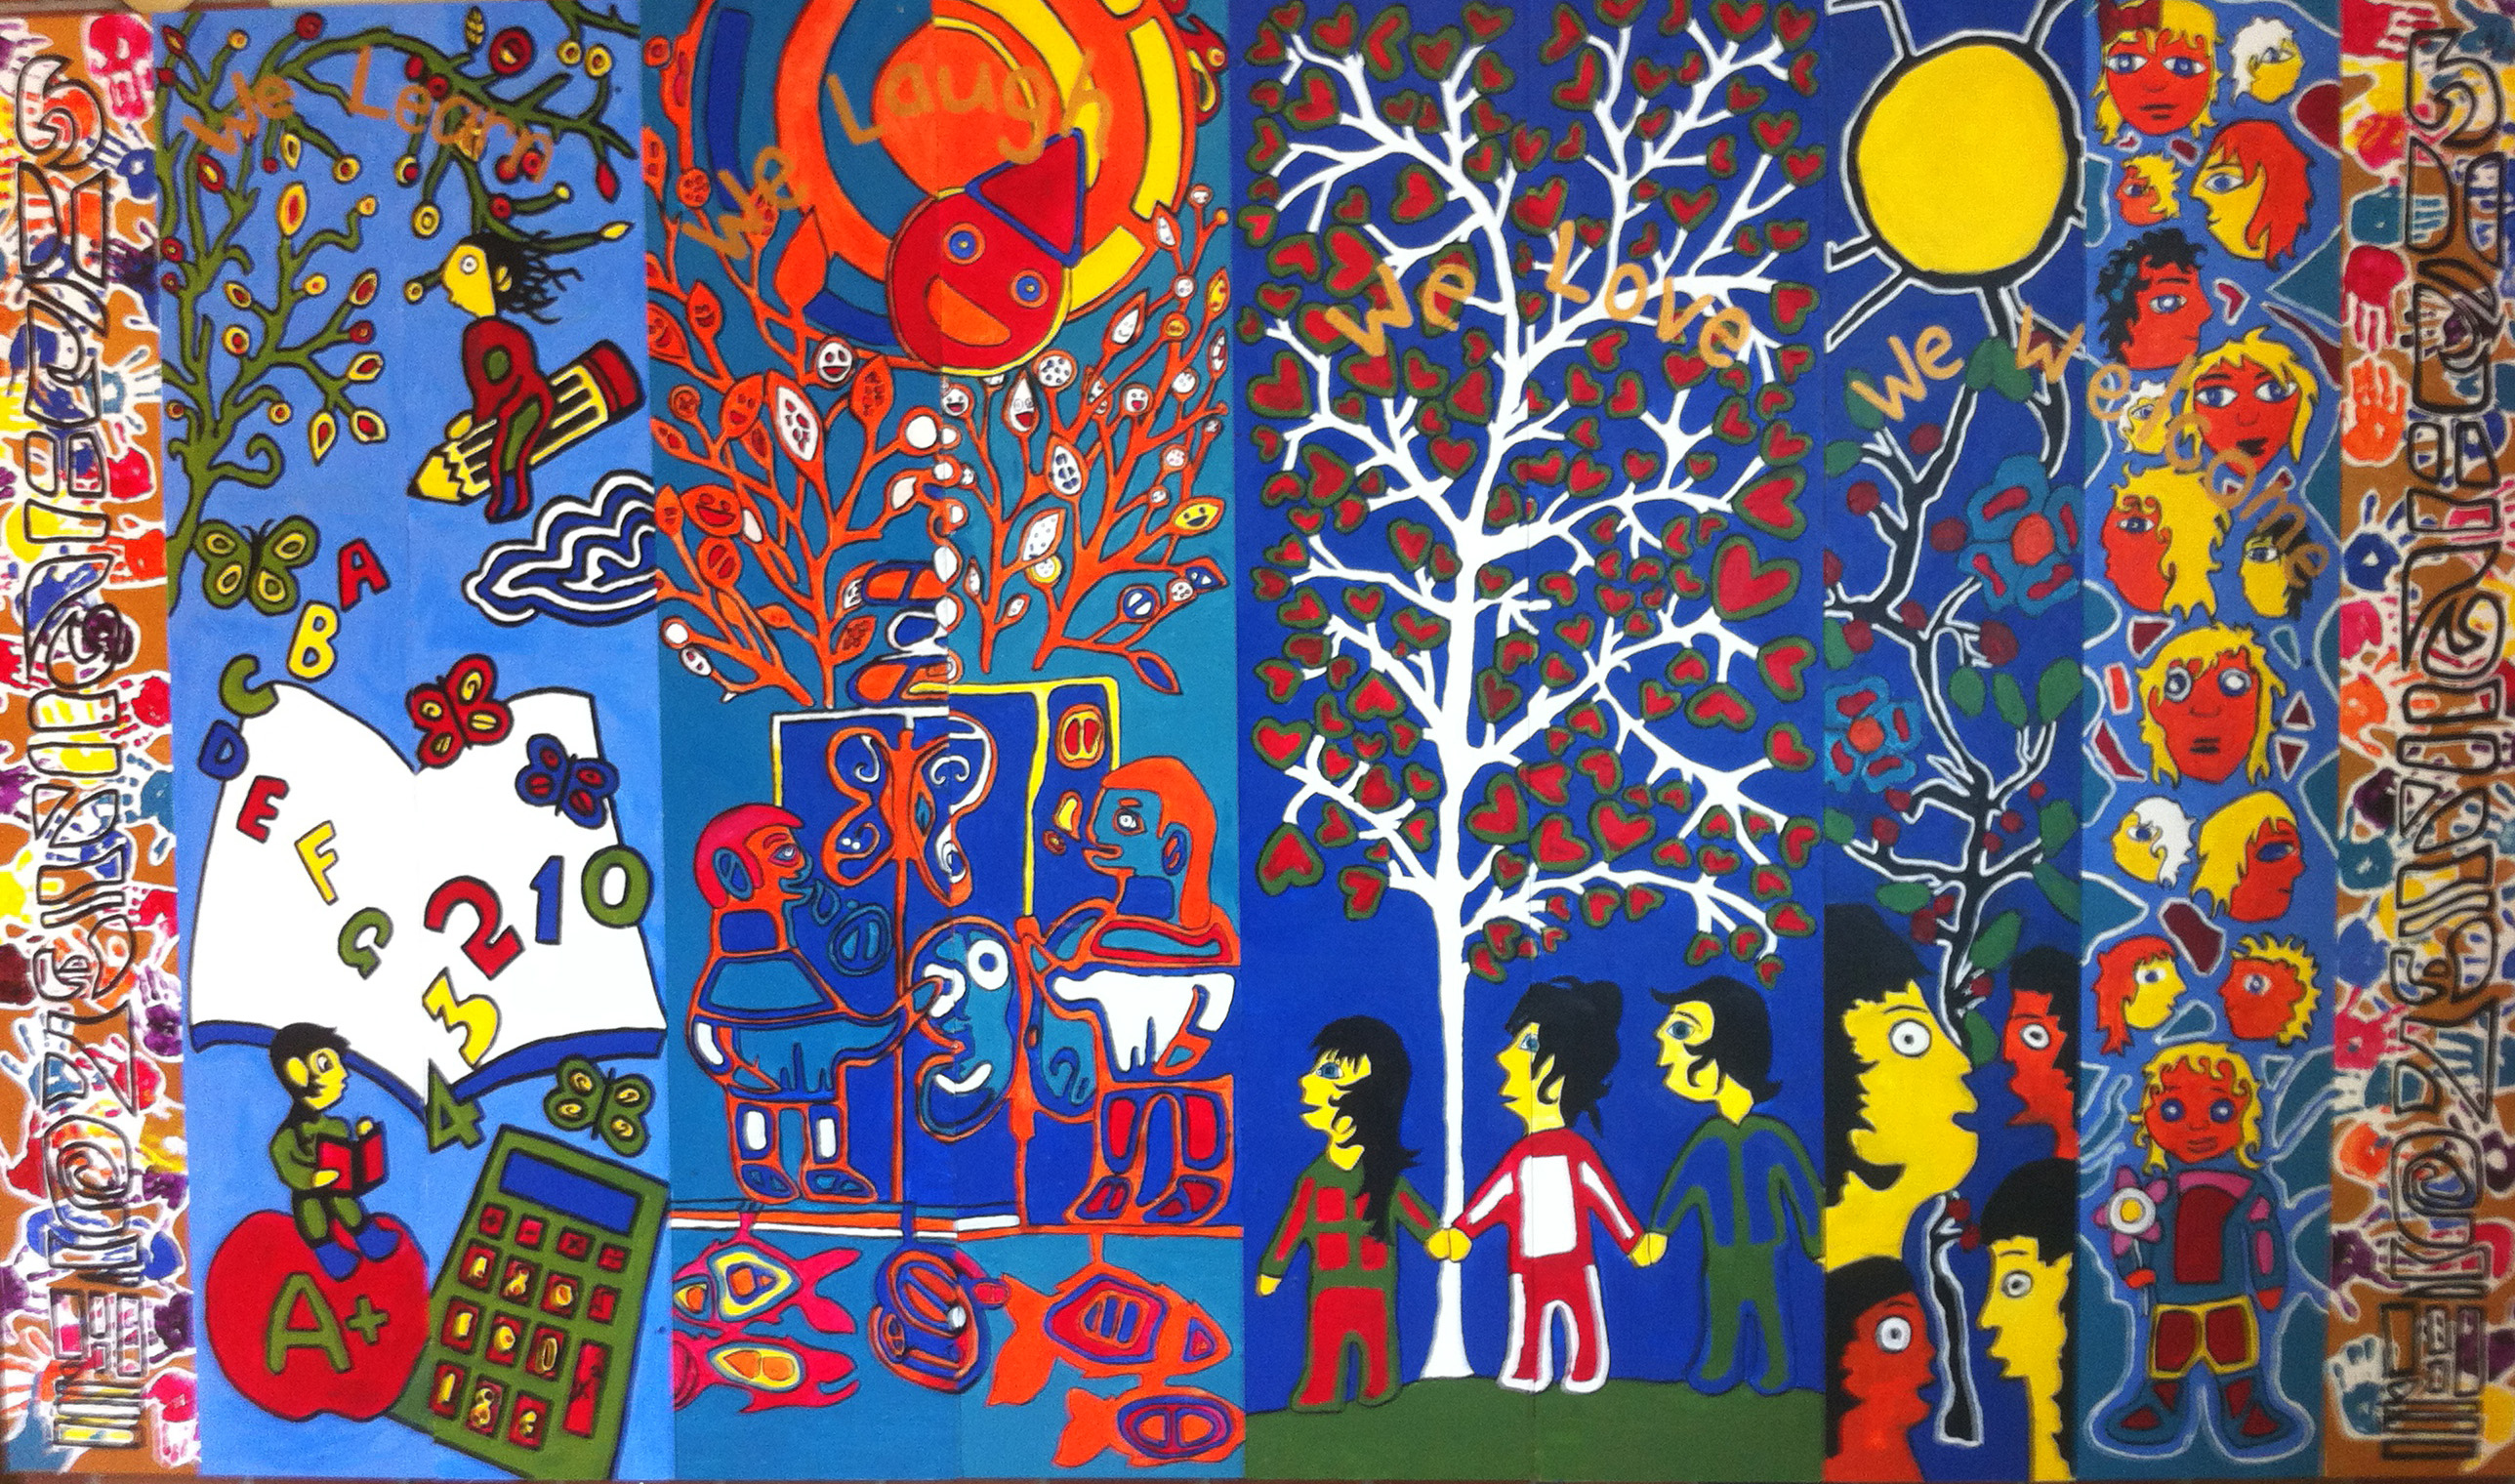 Painting divided in four, one column depicting two students typing on a calculator and another flying on a pencil with words floating around them, next column of two students playing and the sun smiling down on them, the next column of three students holding hands and a flourishing tree growing behind them and the final column is divided in tow, one with the faces of four students and vines wrapping over the background with the sun shining over them and the last column of various faces with different shapes and hair colors.